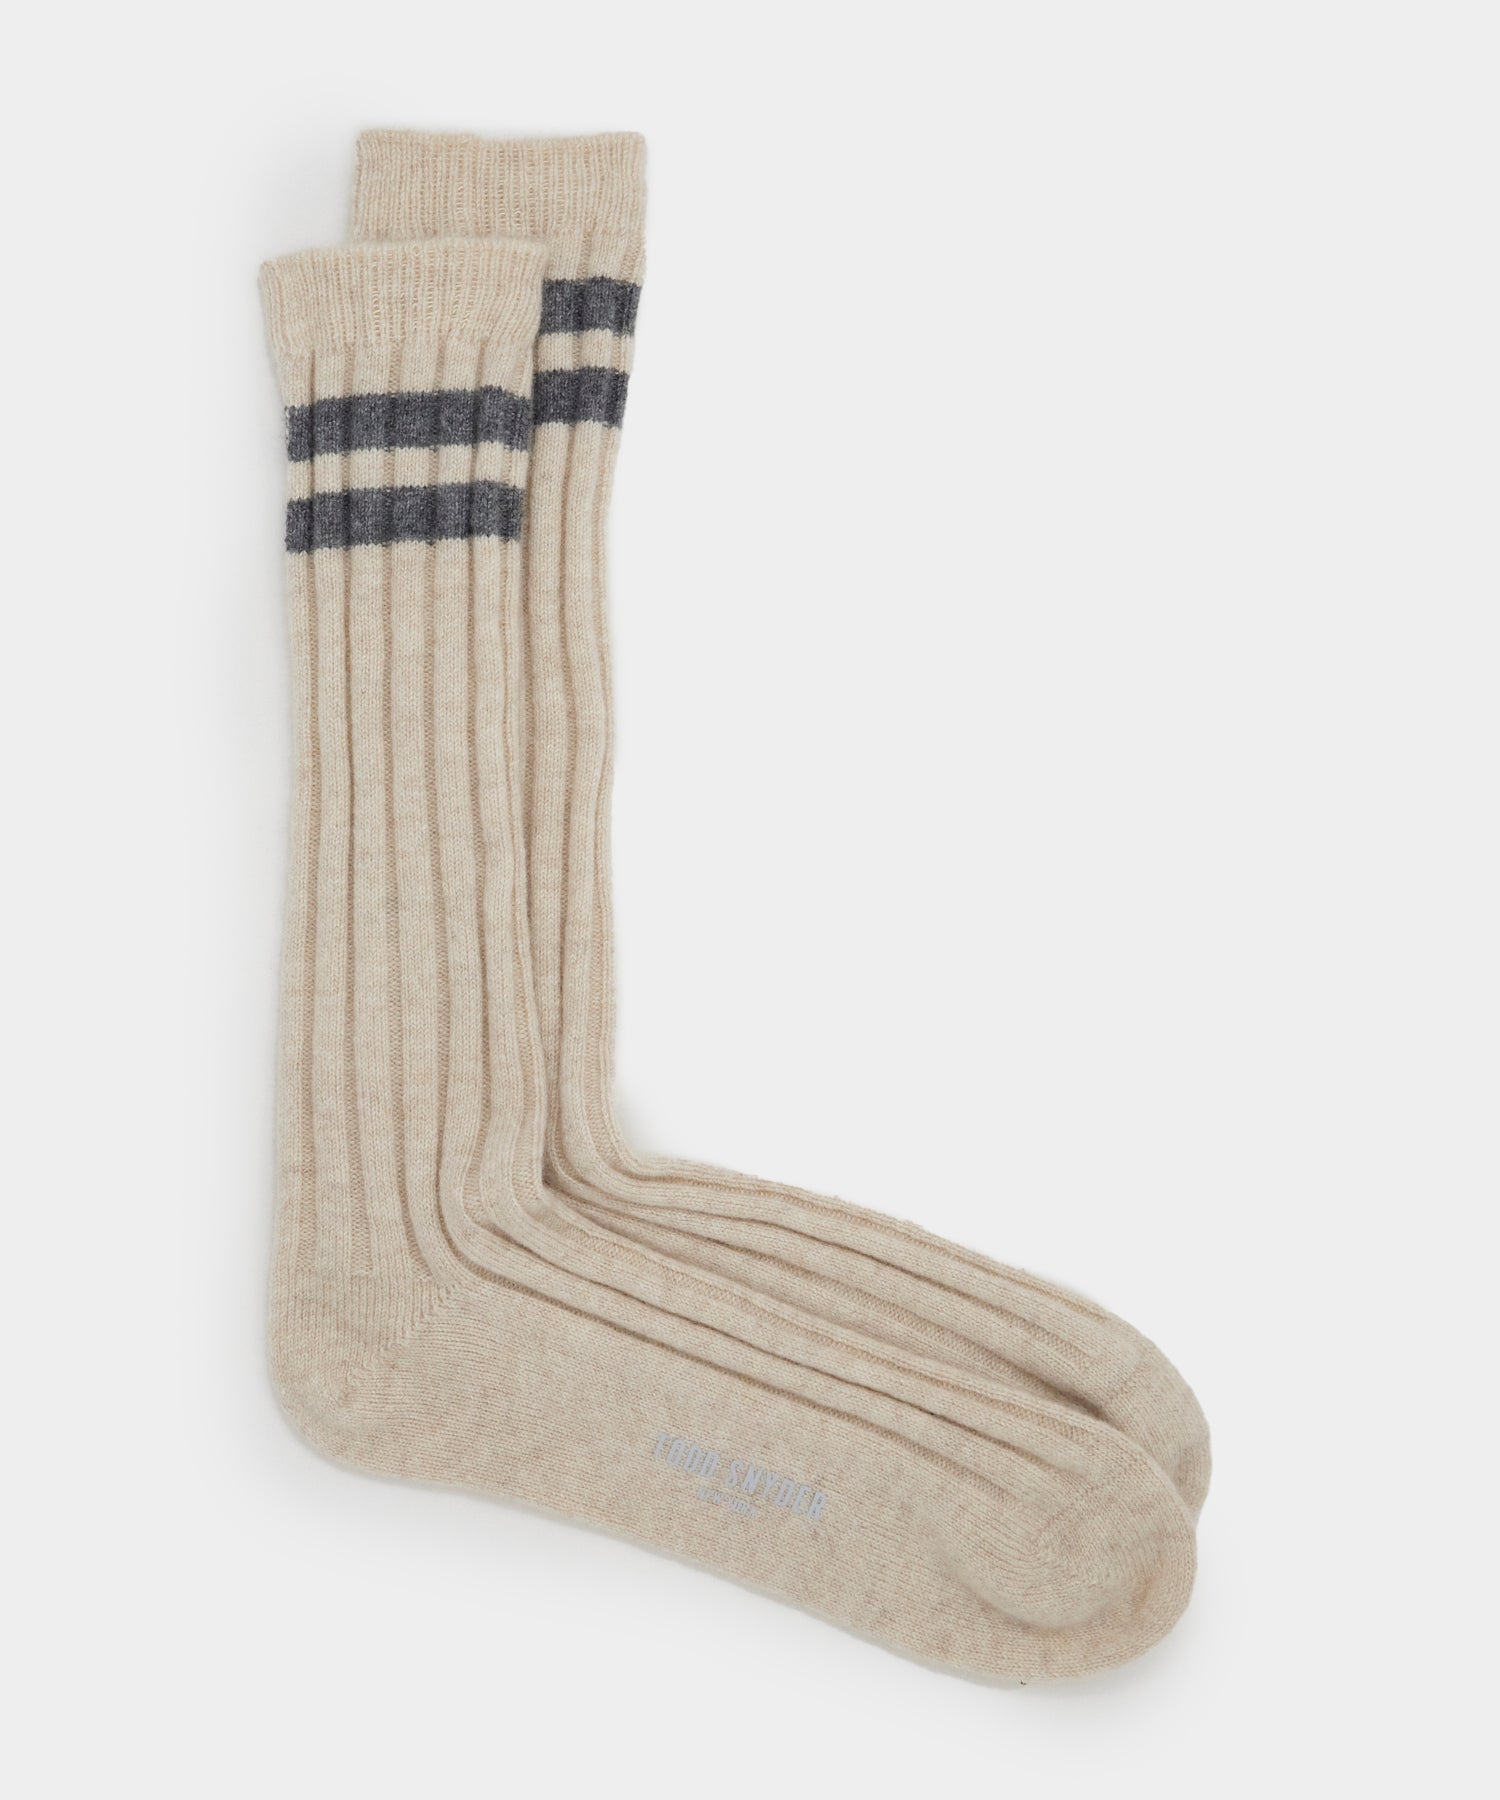 Cashmere Striped Sock in Oatmeal Heather